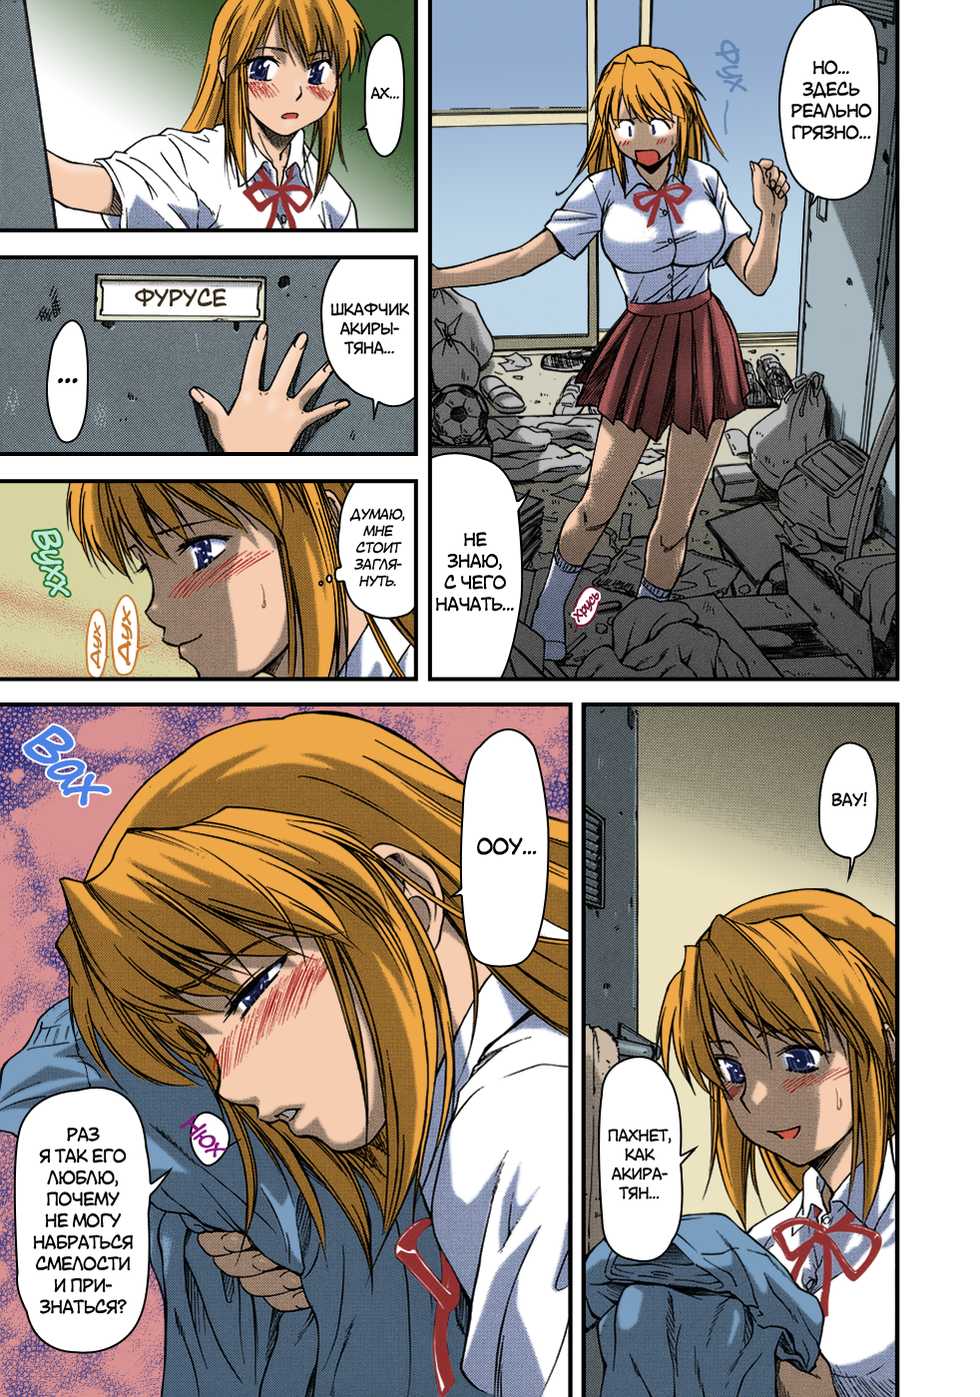 [Nagare Ippon] Offside Girl Ch. 1-5 [Russian] [Colorized] [Decensored] [WIP] - Page 14